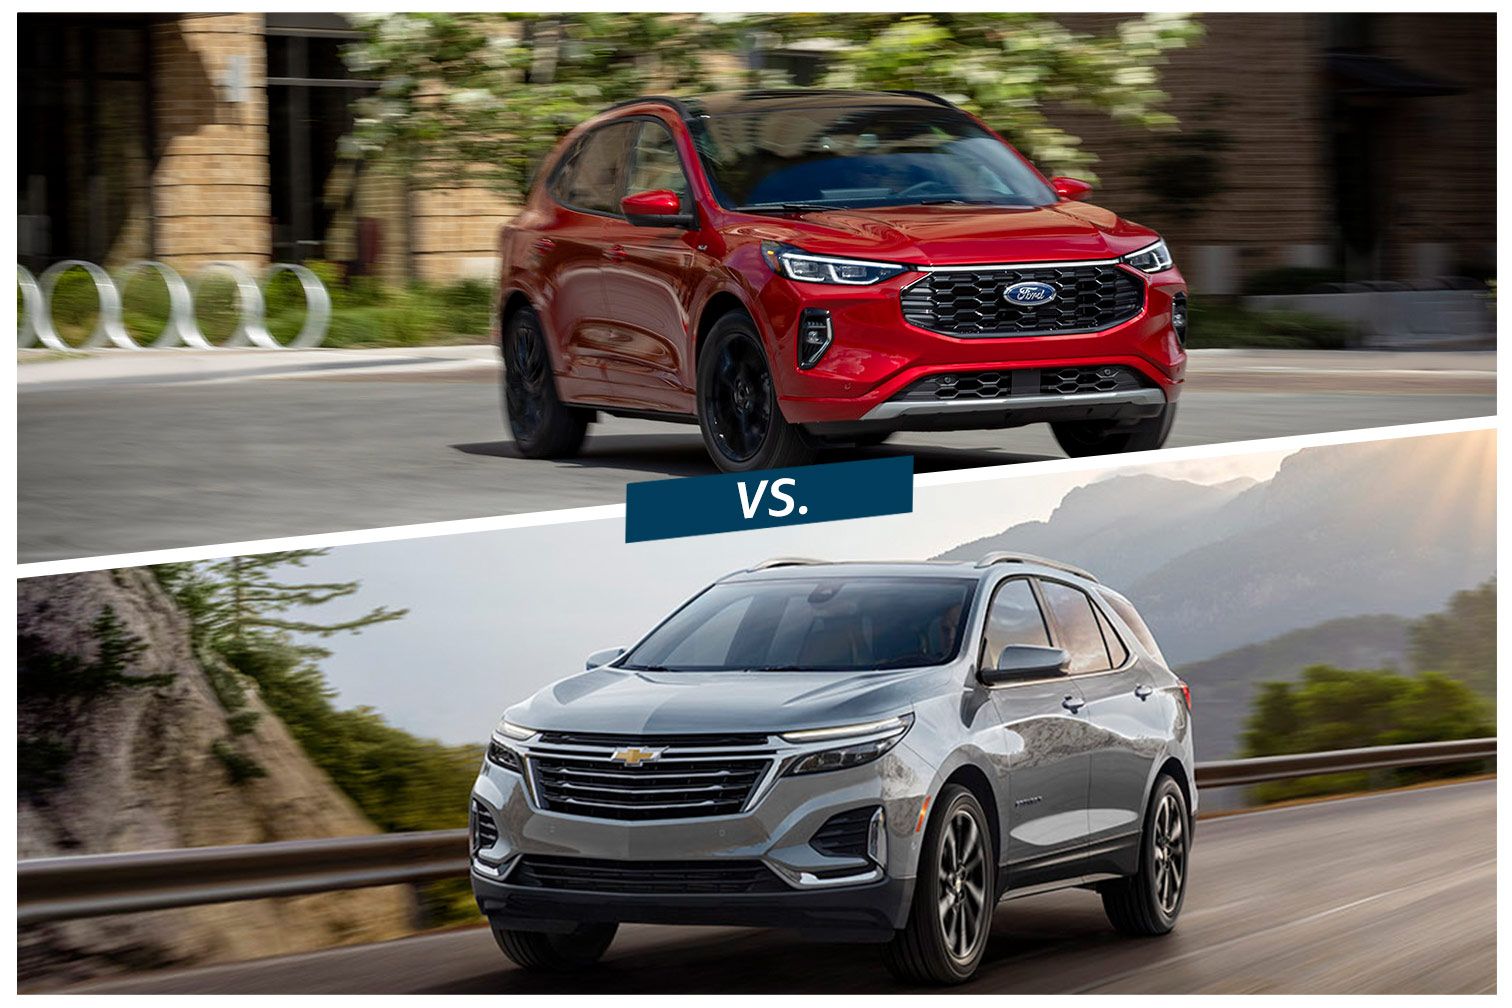 Ford Escape and Chevrolet Equinox